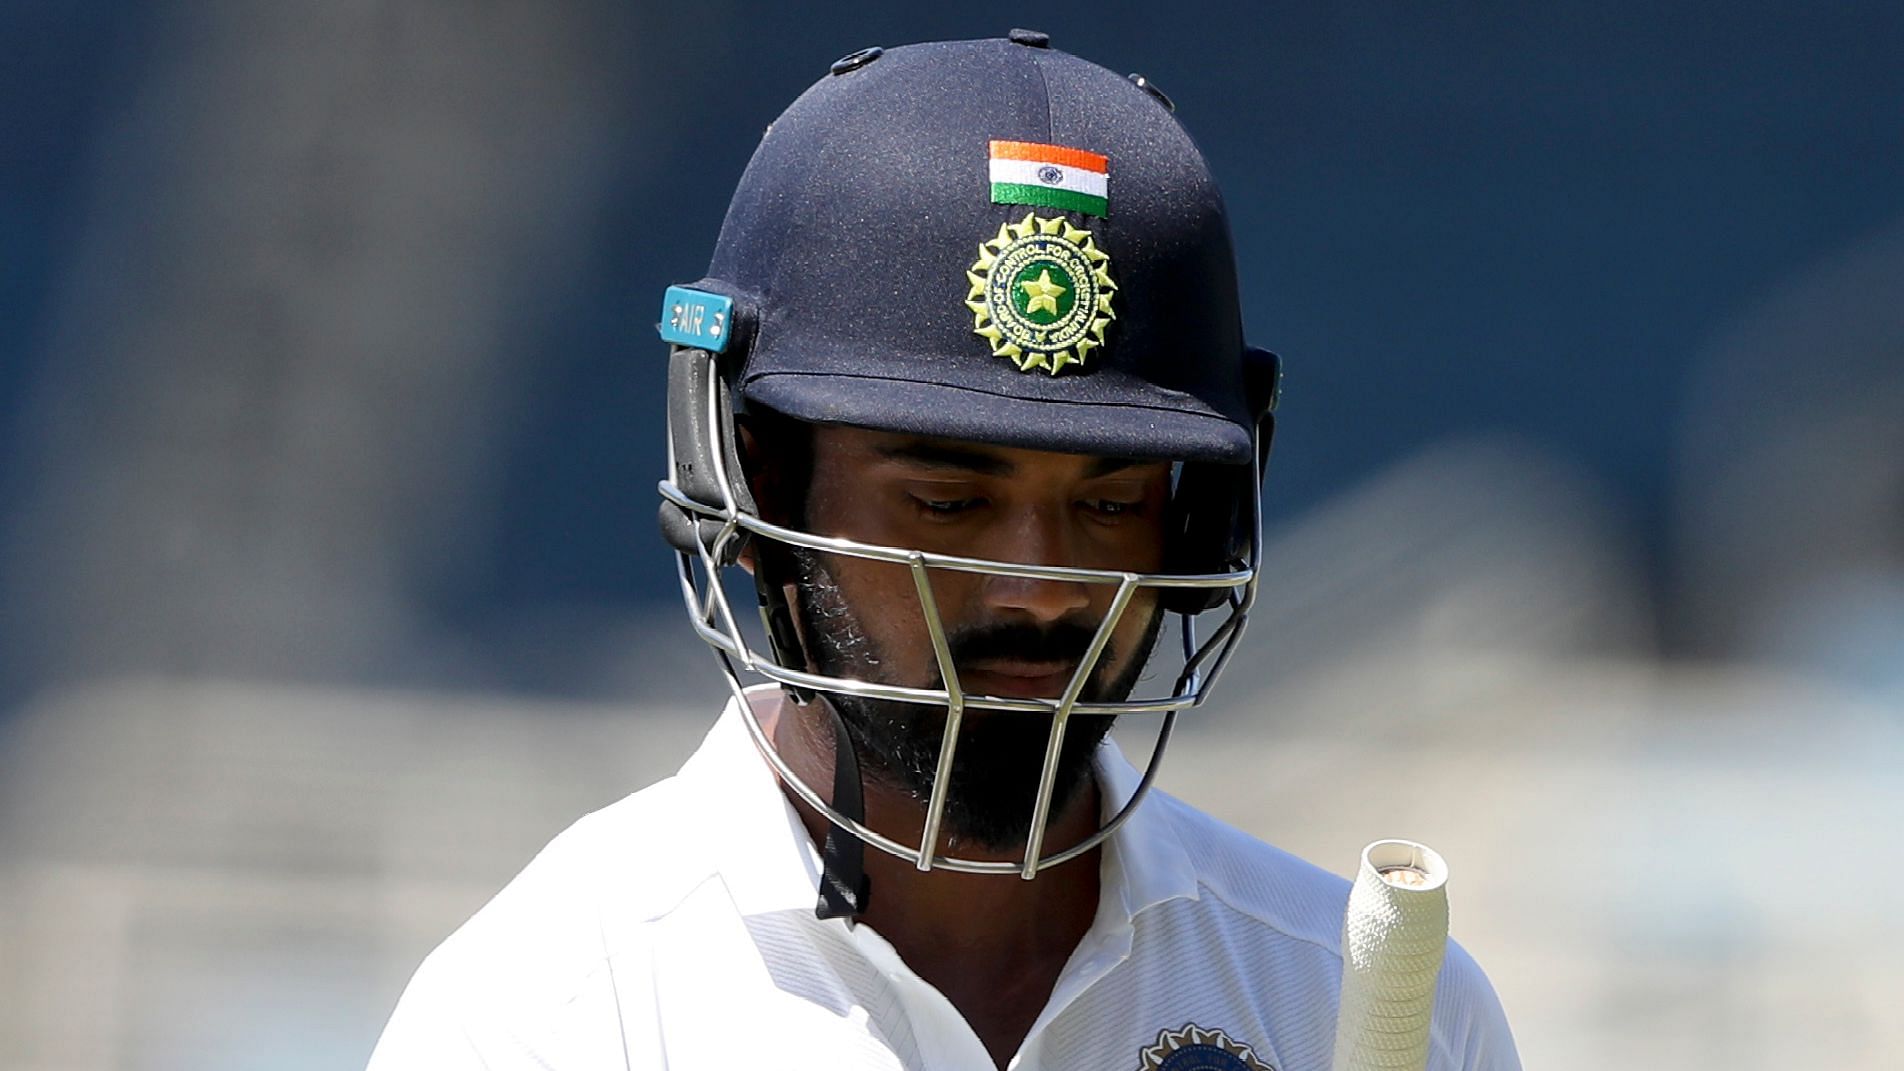 MSK Prasad, chief selector of the Board of Control for Cricket in India (BCCI), has acknowledged that KL Rahul’s form in the Tests is a cause of concern.